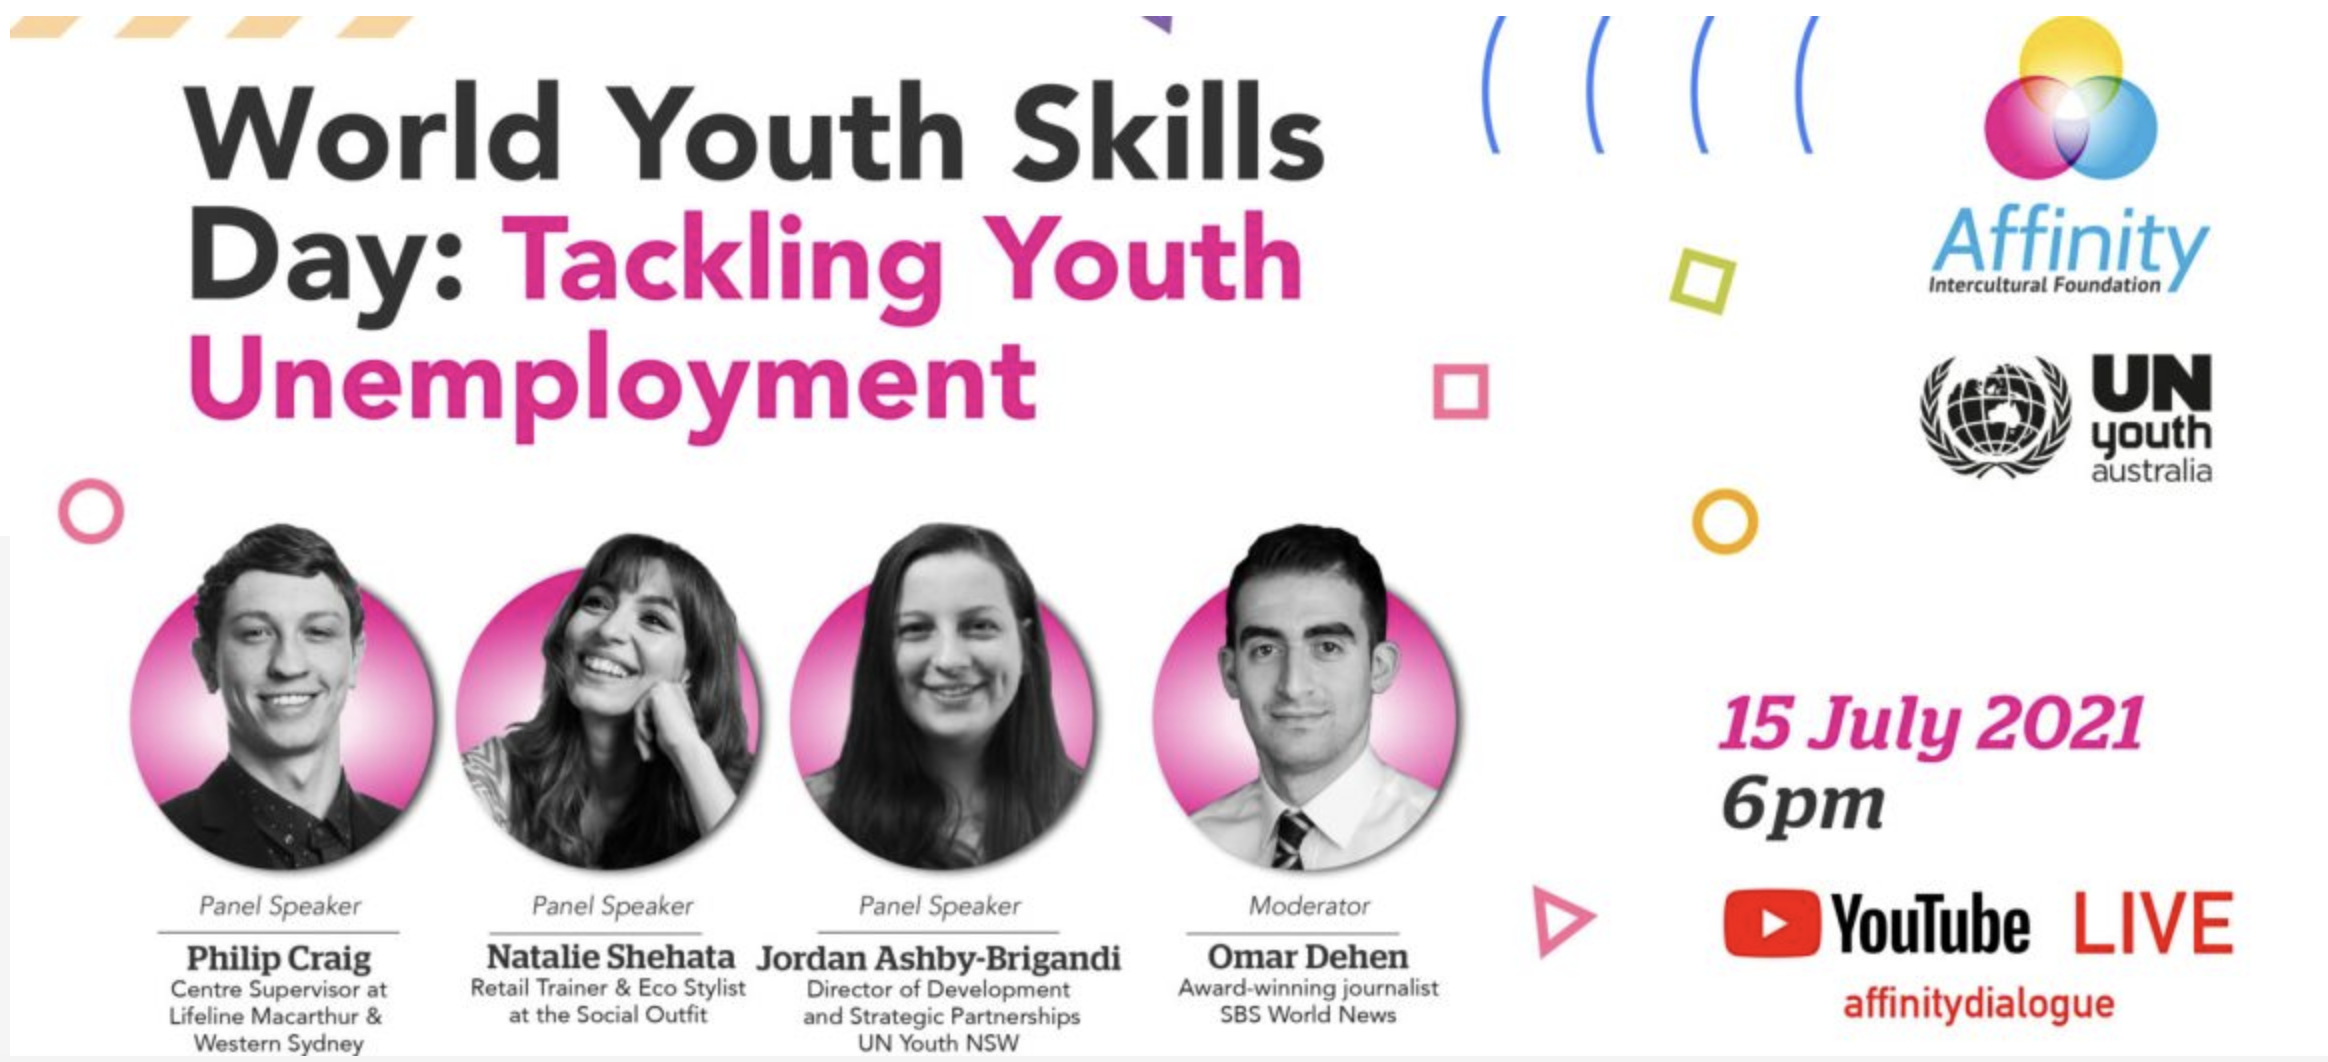 World Youth Skills Day: Tackling Youth Unemployment